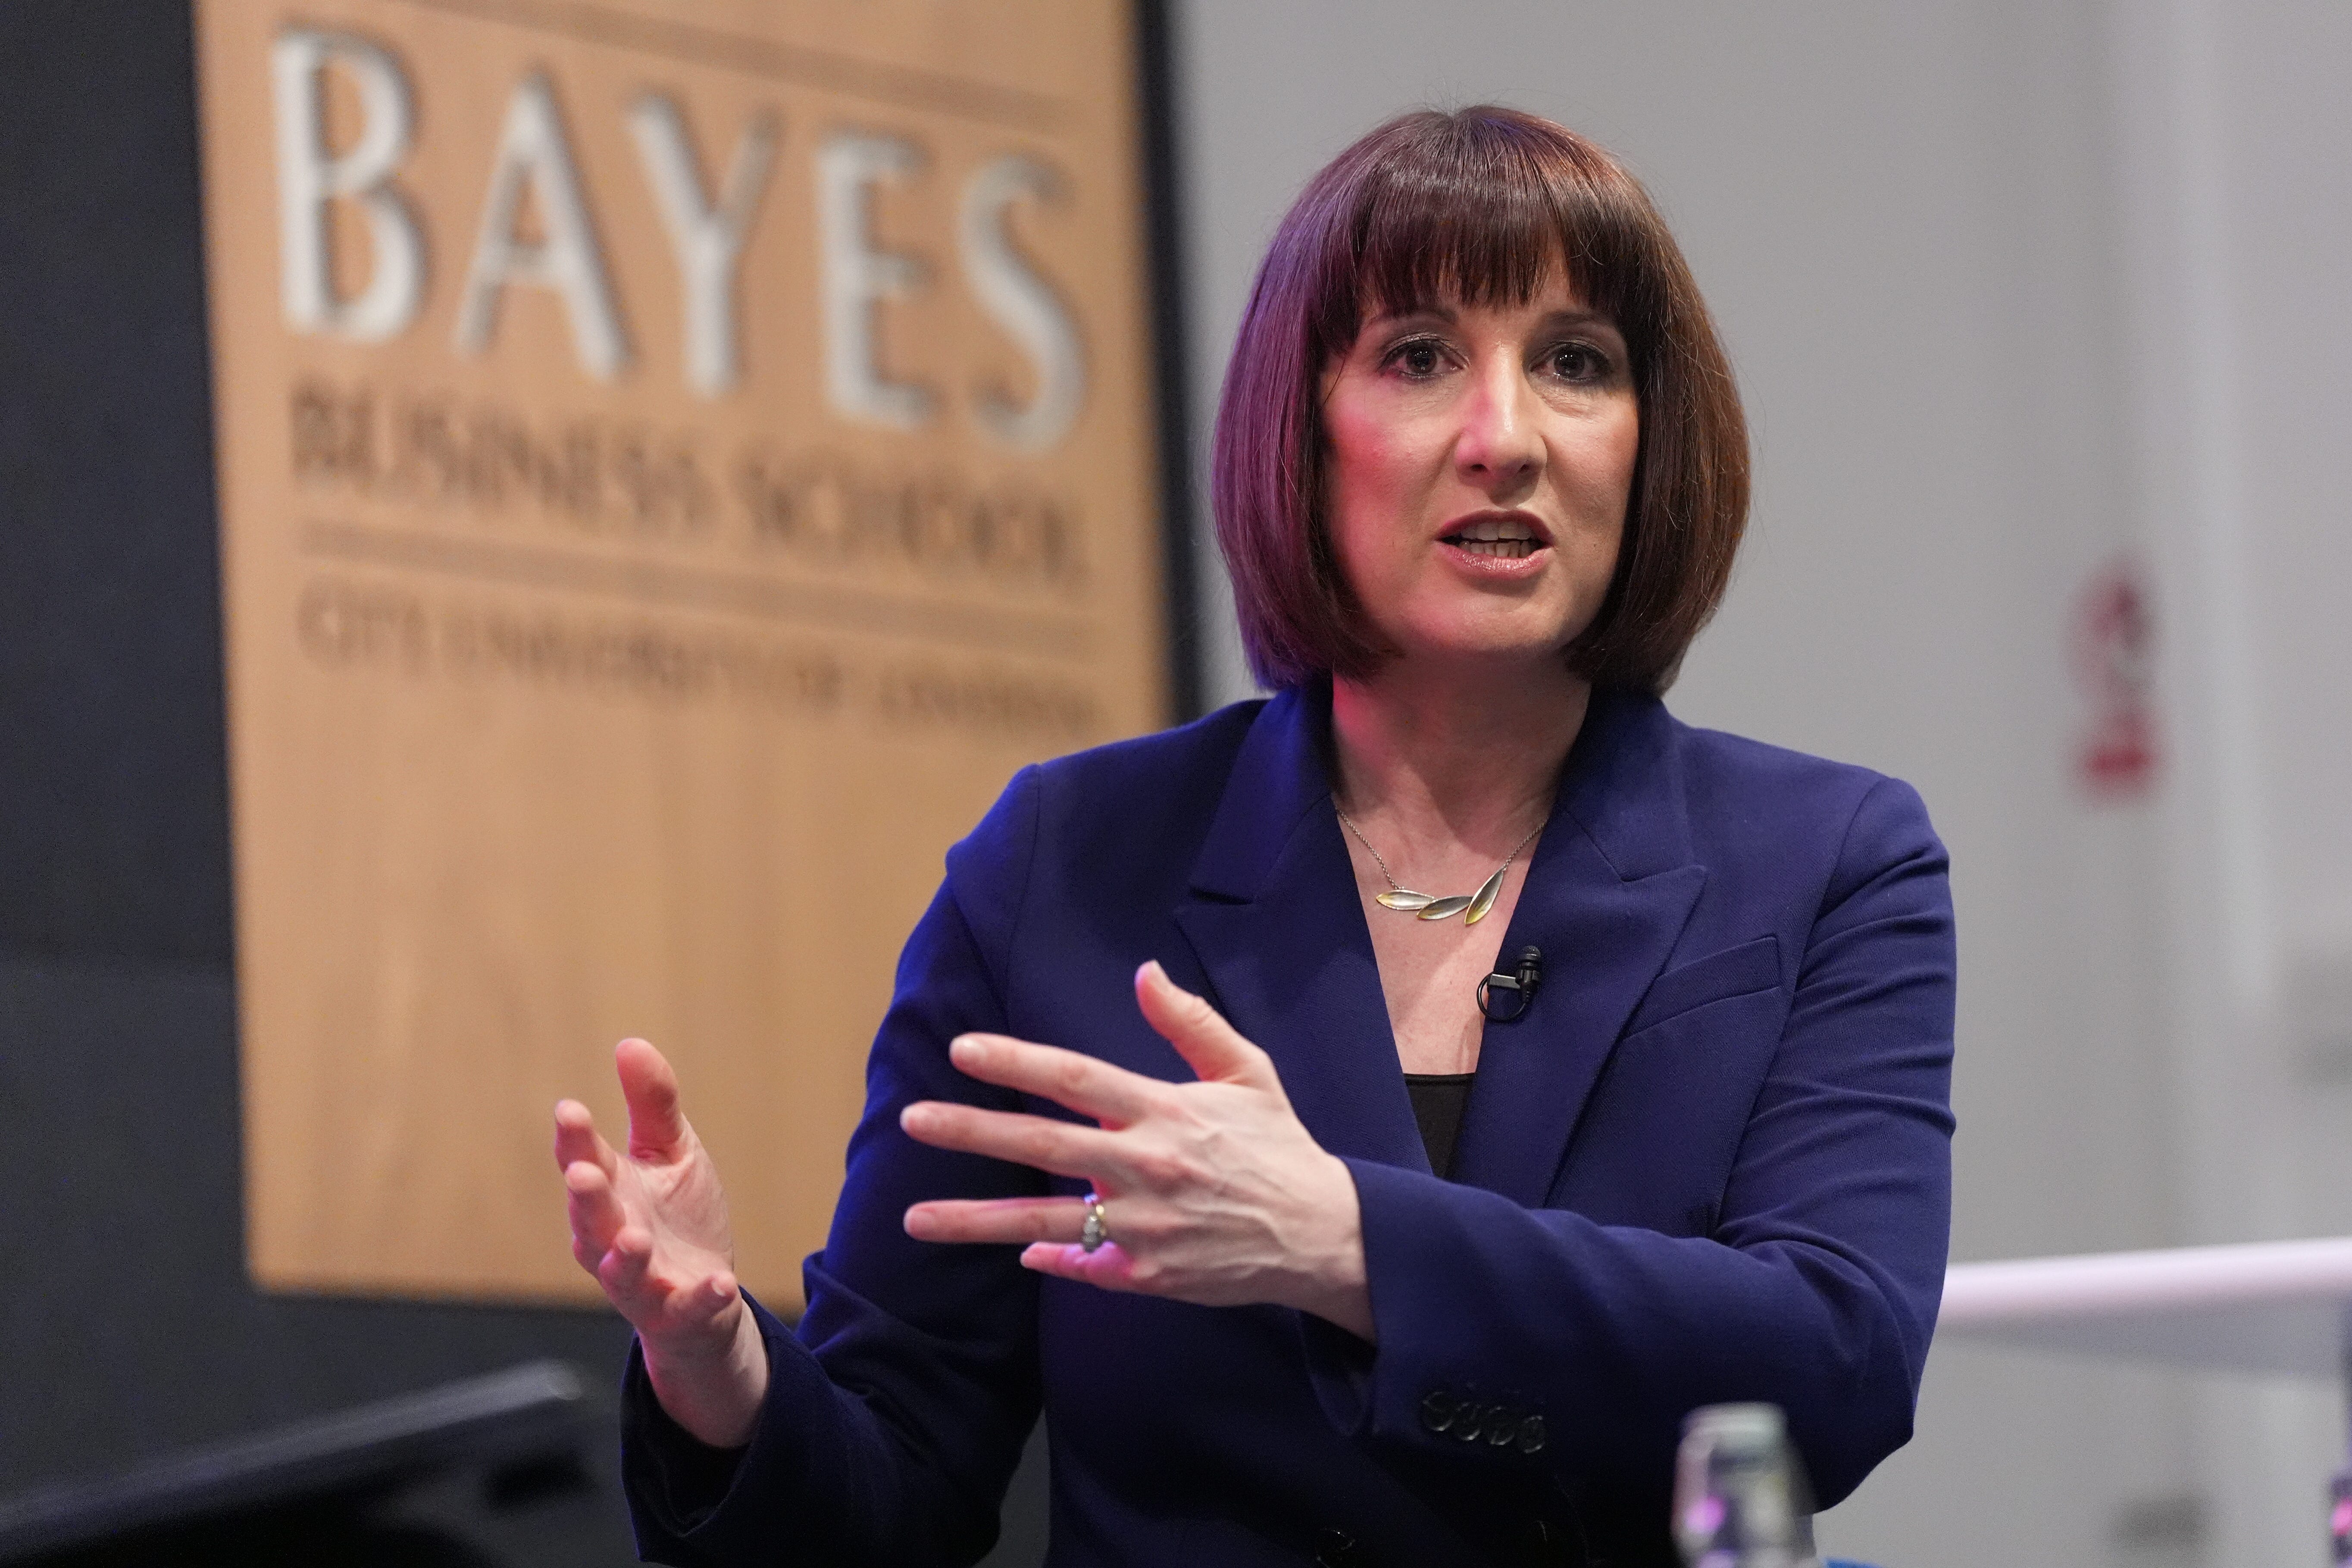 Shadow chancellor Rachel Reeves said the Tories cannot claim their plan to grow the economy is working